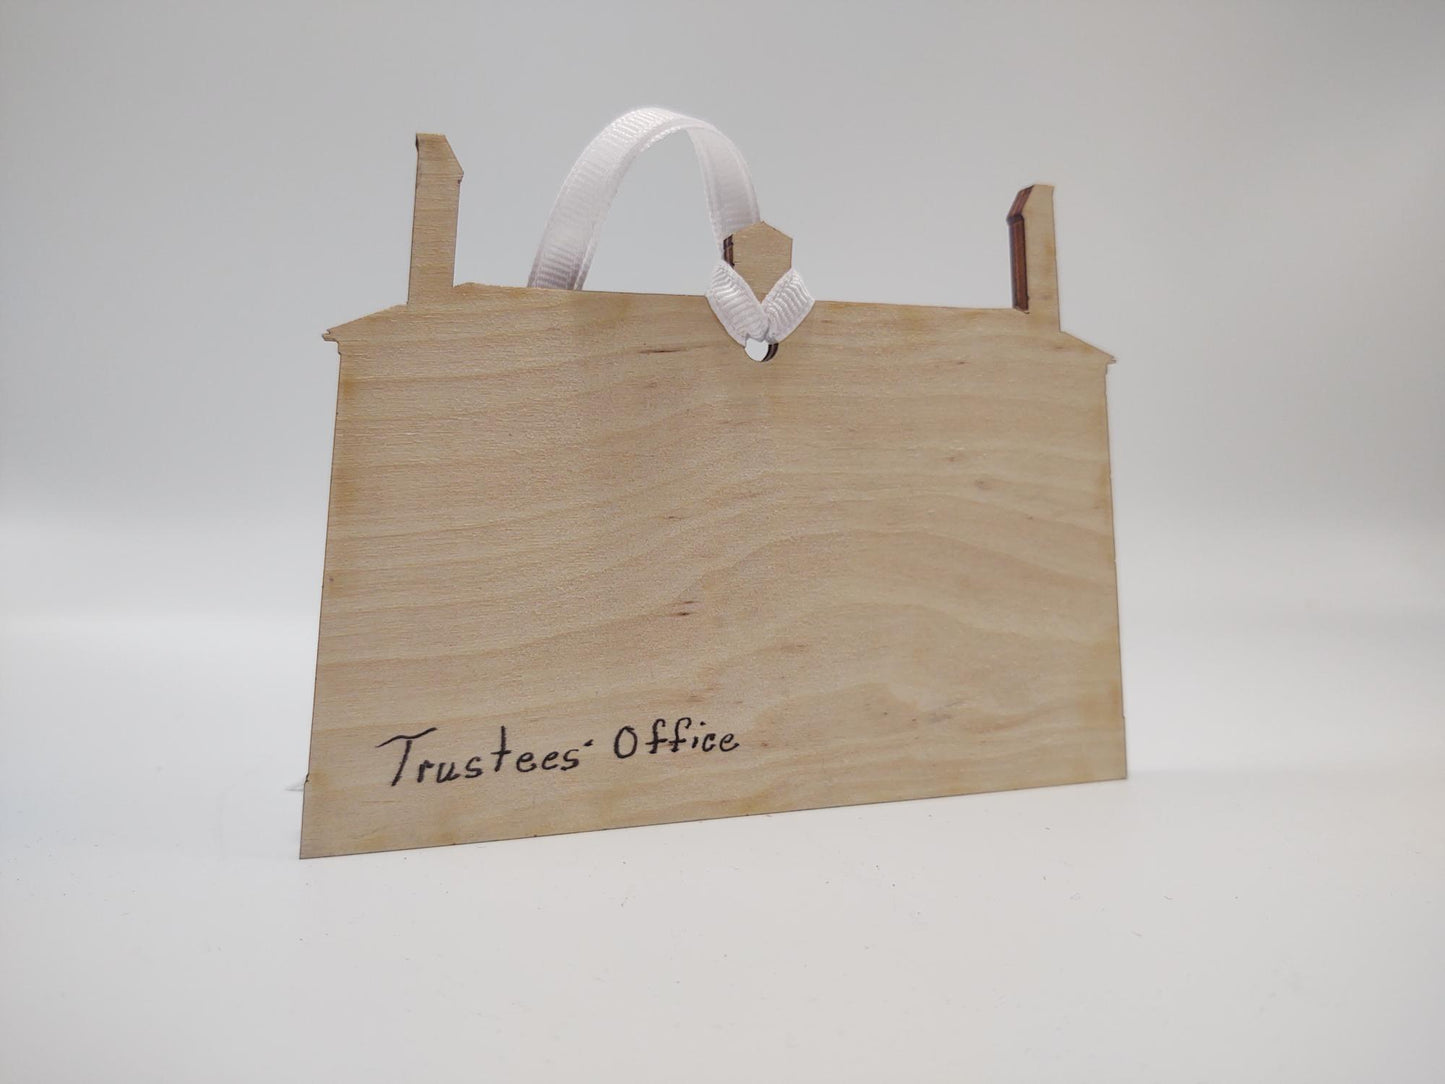 Christmas Ornament - The Trustees Office, Shaker Village Building